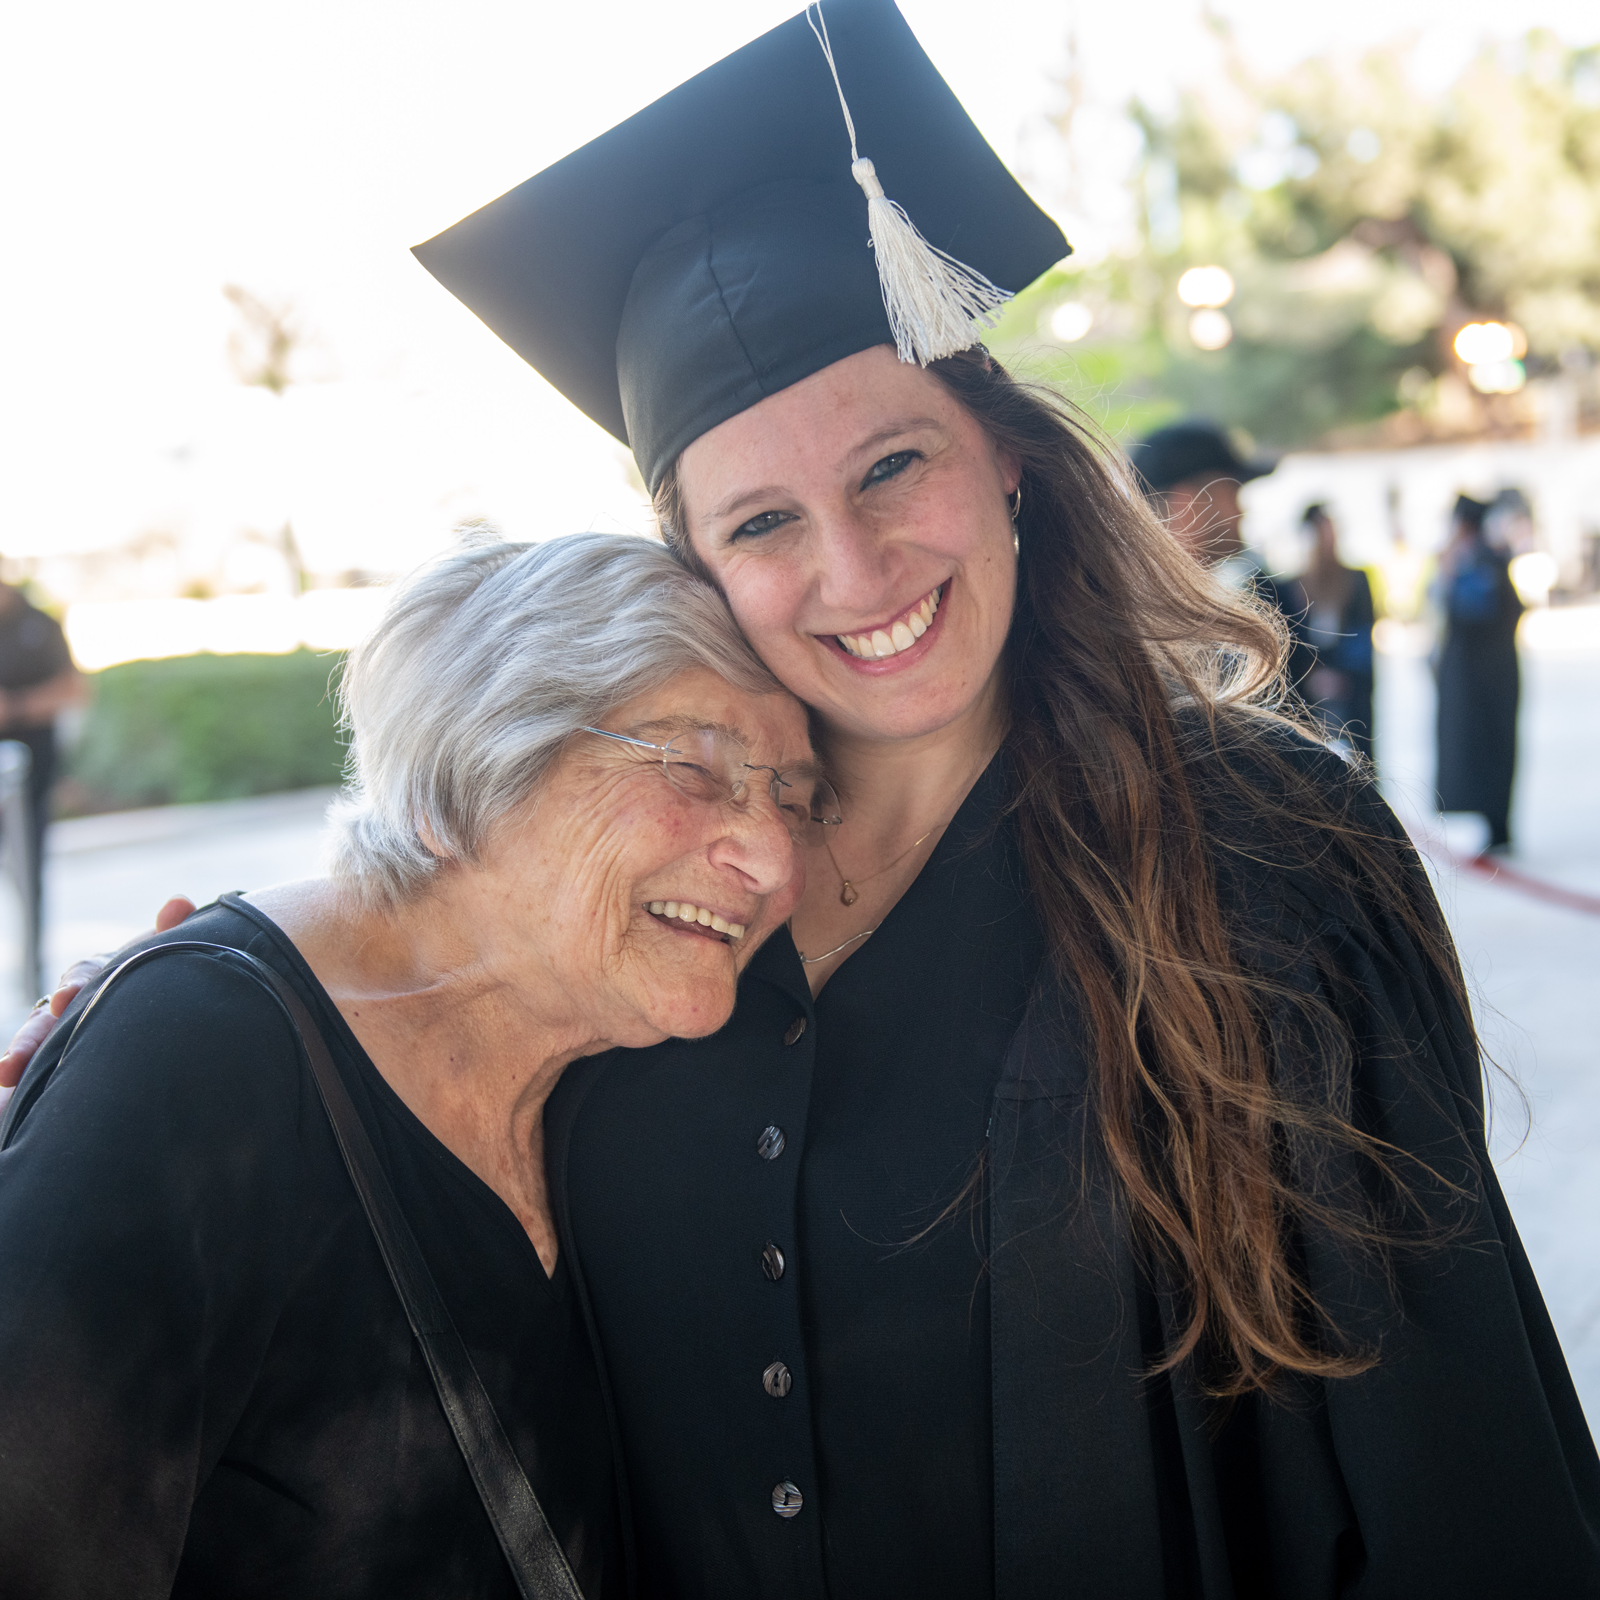 Graduate smiling with family member at graduation